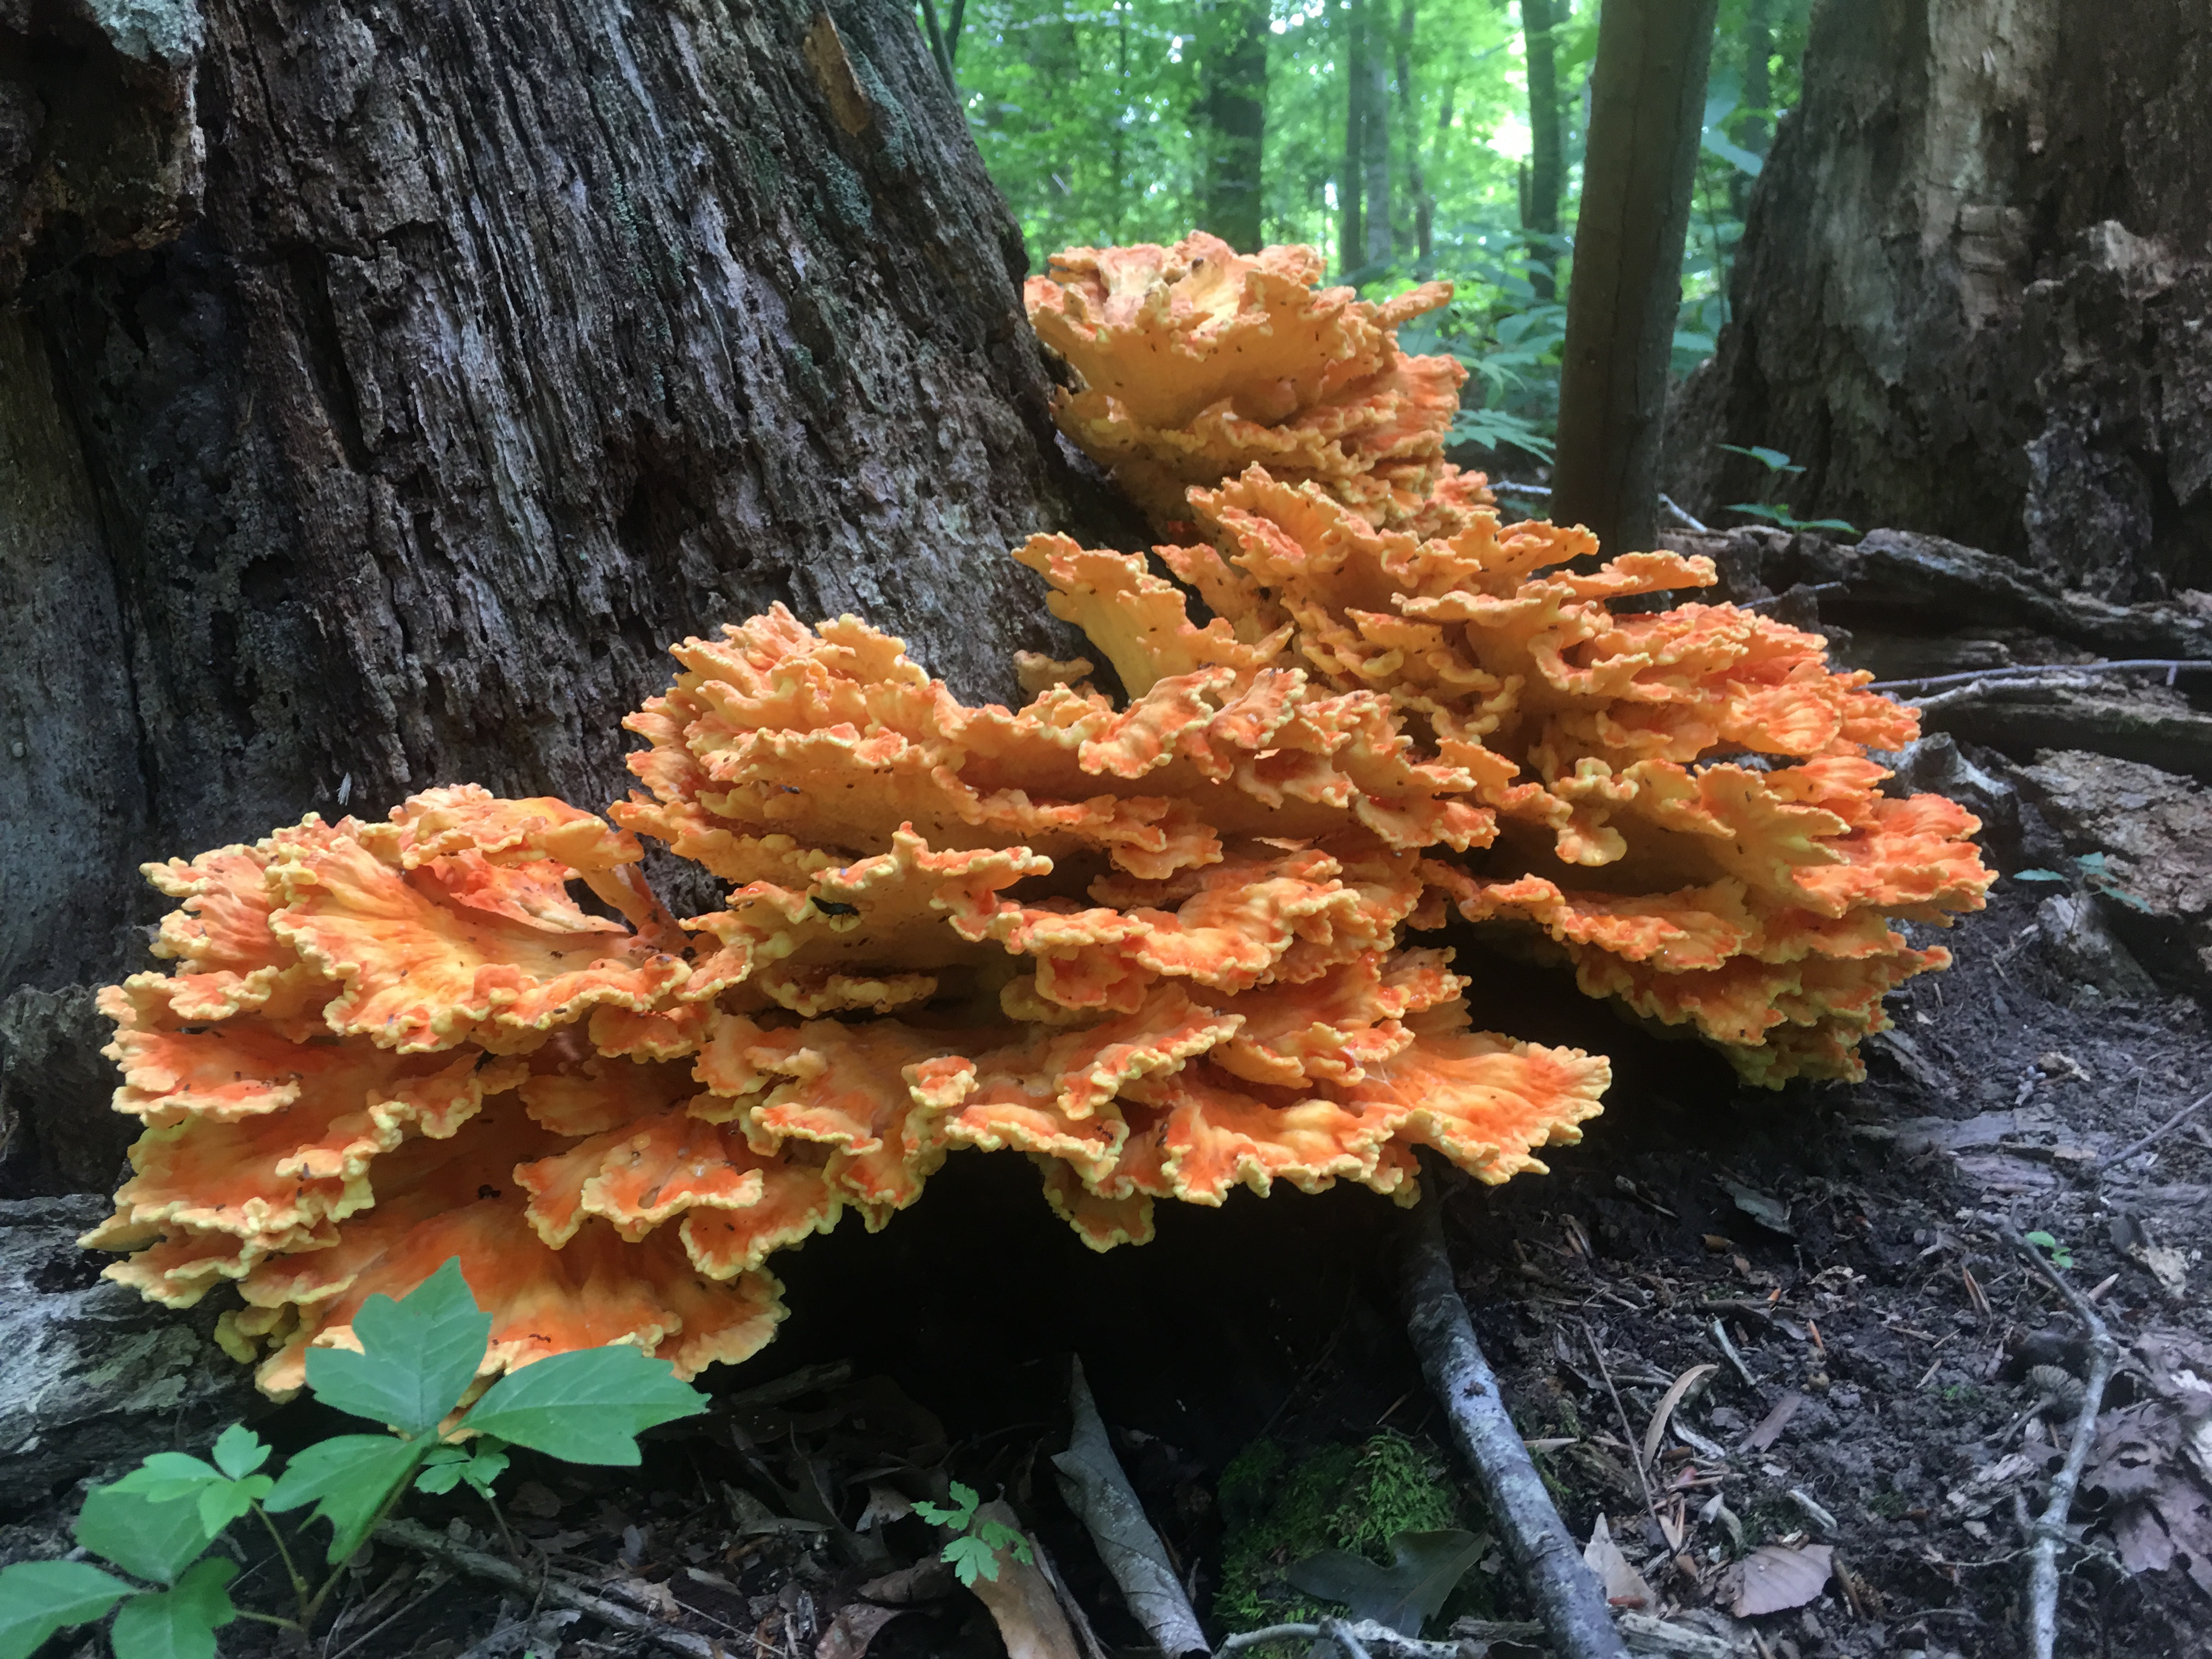 Beautiful forest fungi growing at the base of a dead tree.